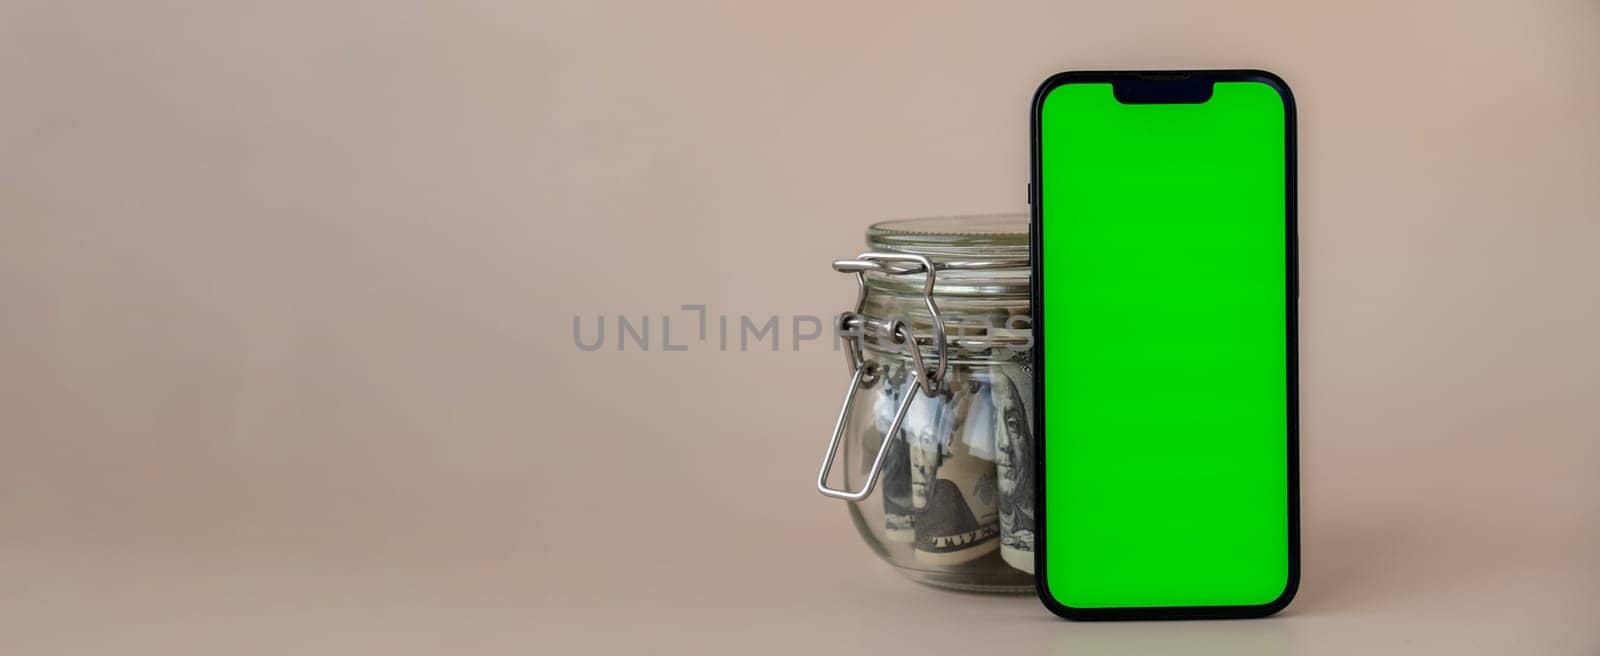 Banner Vertical Green screen on modern mobile phone in background of glass jar full of American currency dollar banknotes on beige background. Cope space for text. Advertisement for application website. Concept of money economy banks and finances